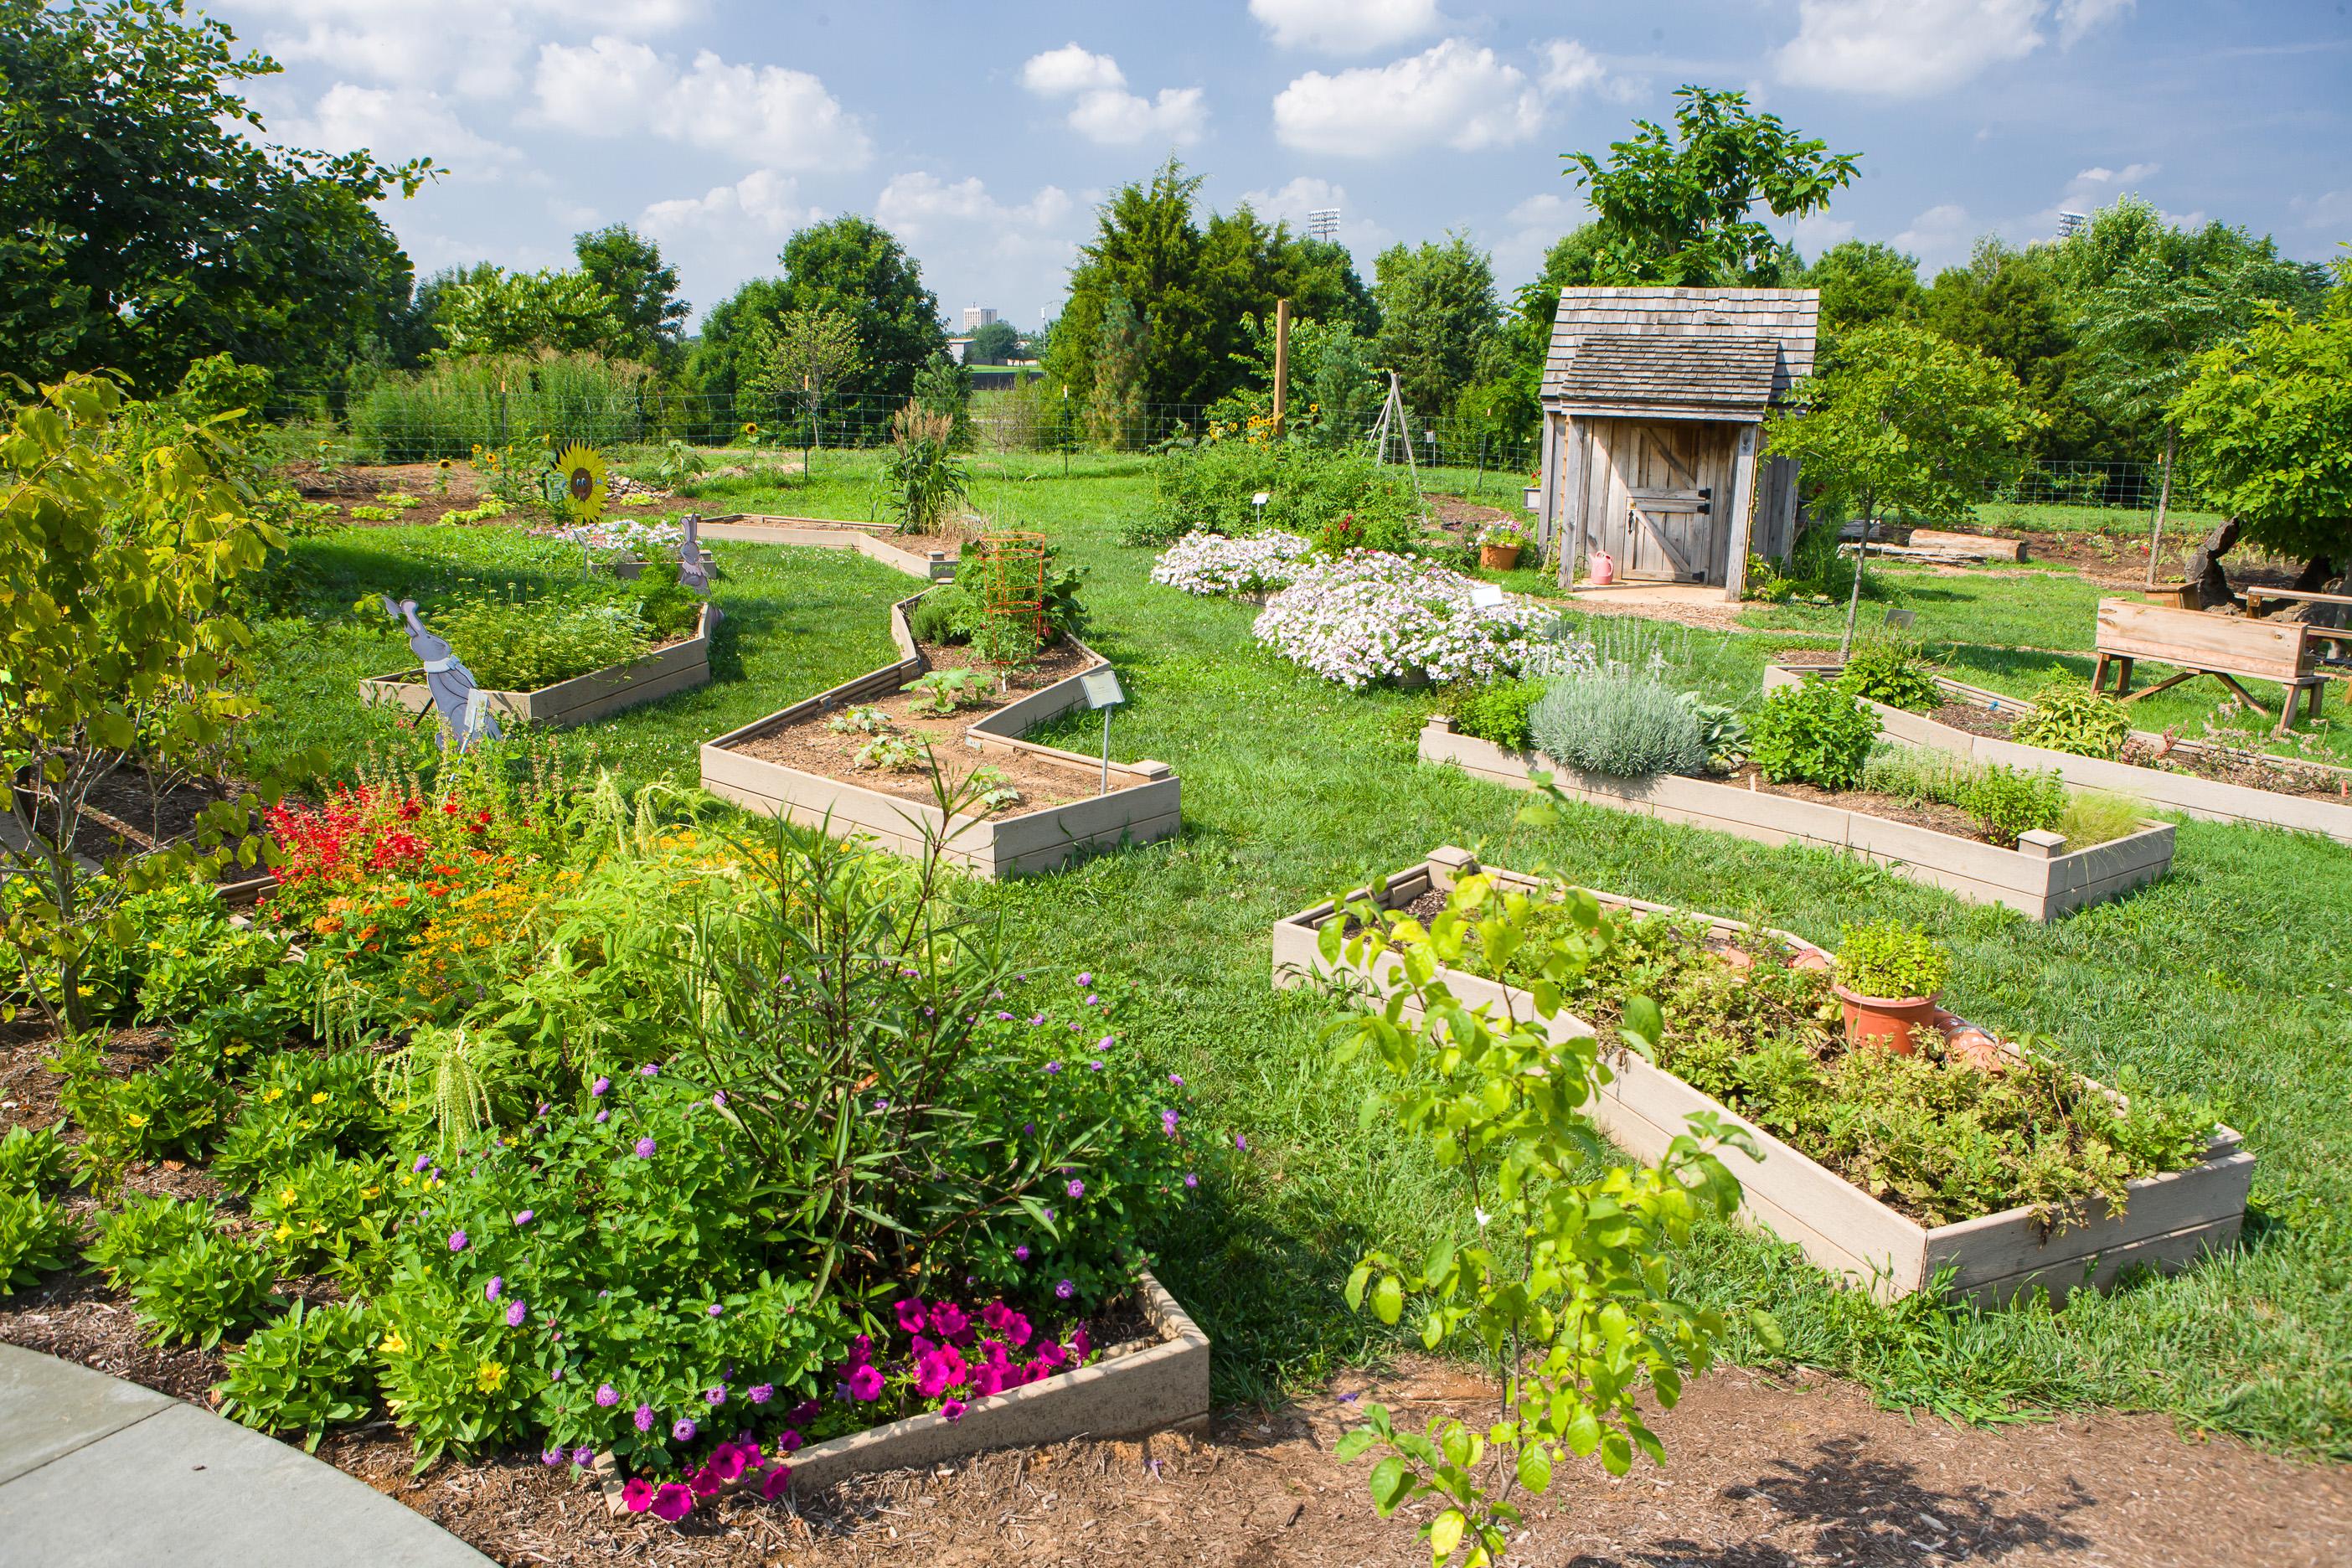 Raised beds gardens like these at The Arboretum's Kentucky Children Garden are ideal for beginning gardeners.  Photo by Matt Barton, UK agricultural communications.